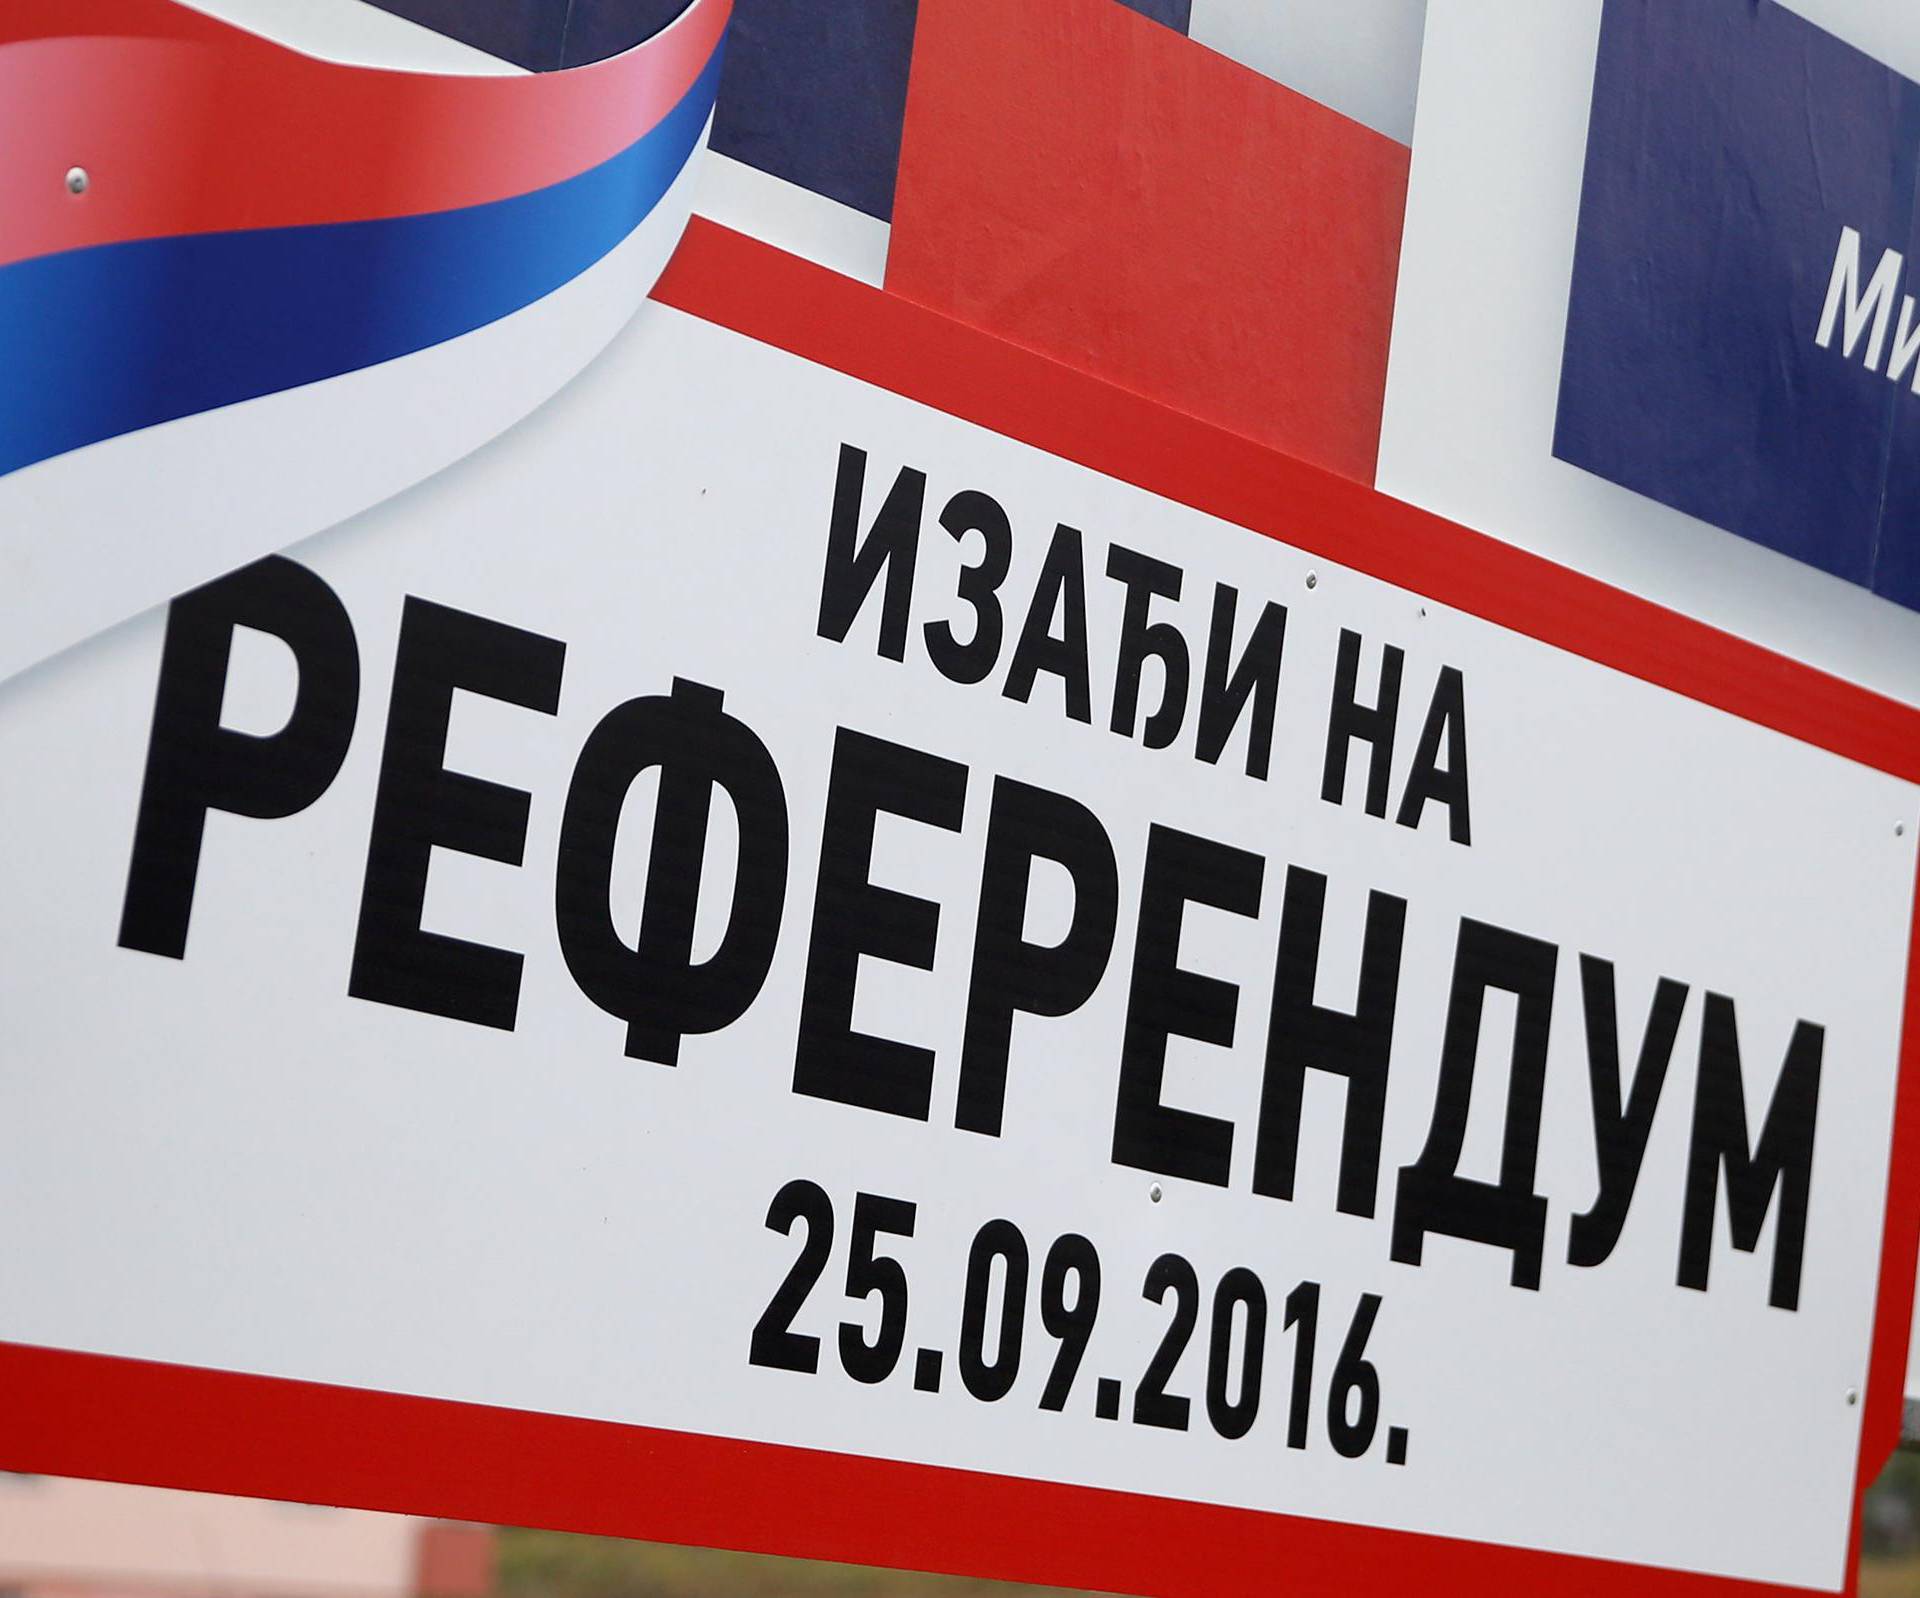 An election poster calling for votes for a referendum on their Statehood Day is pictured in Prnjavor